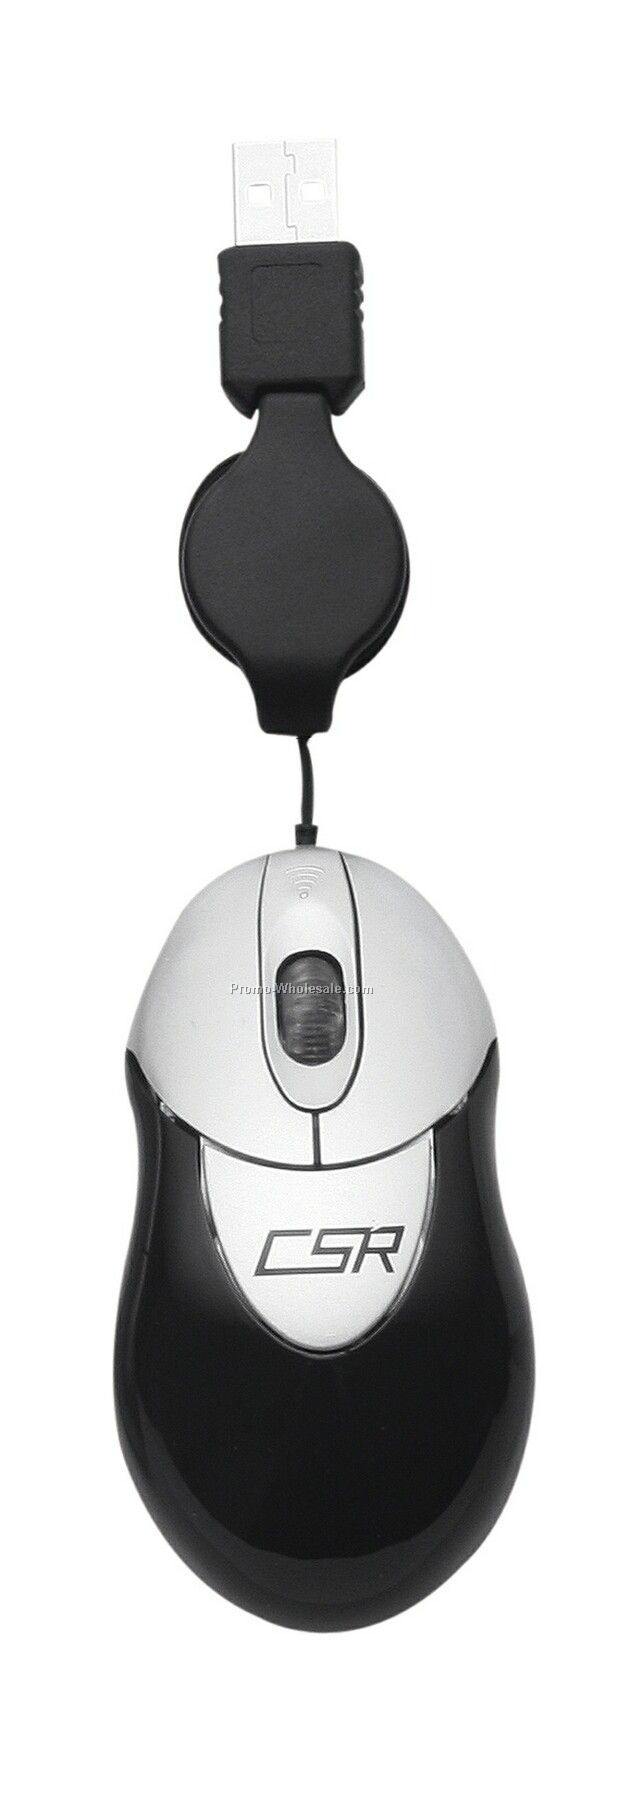 Computer Mouse W/ Retractable Cord